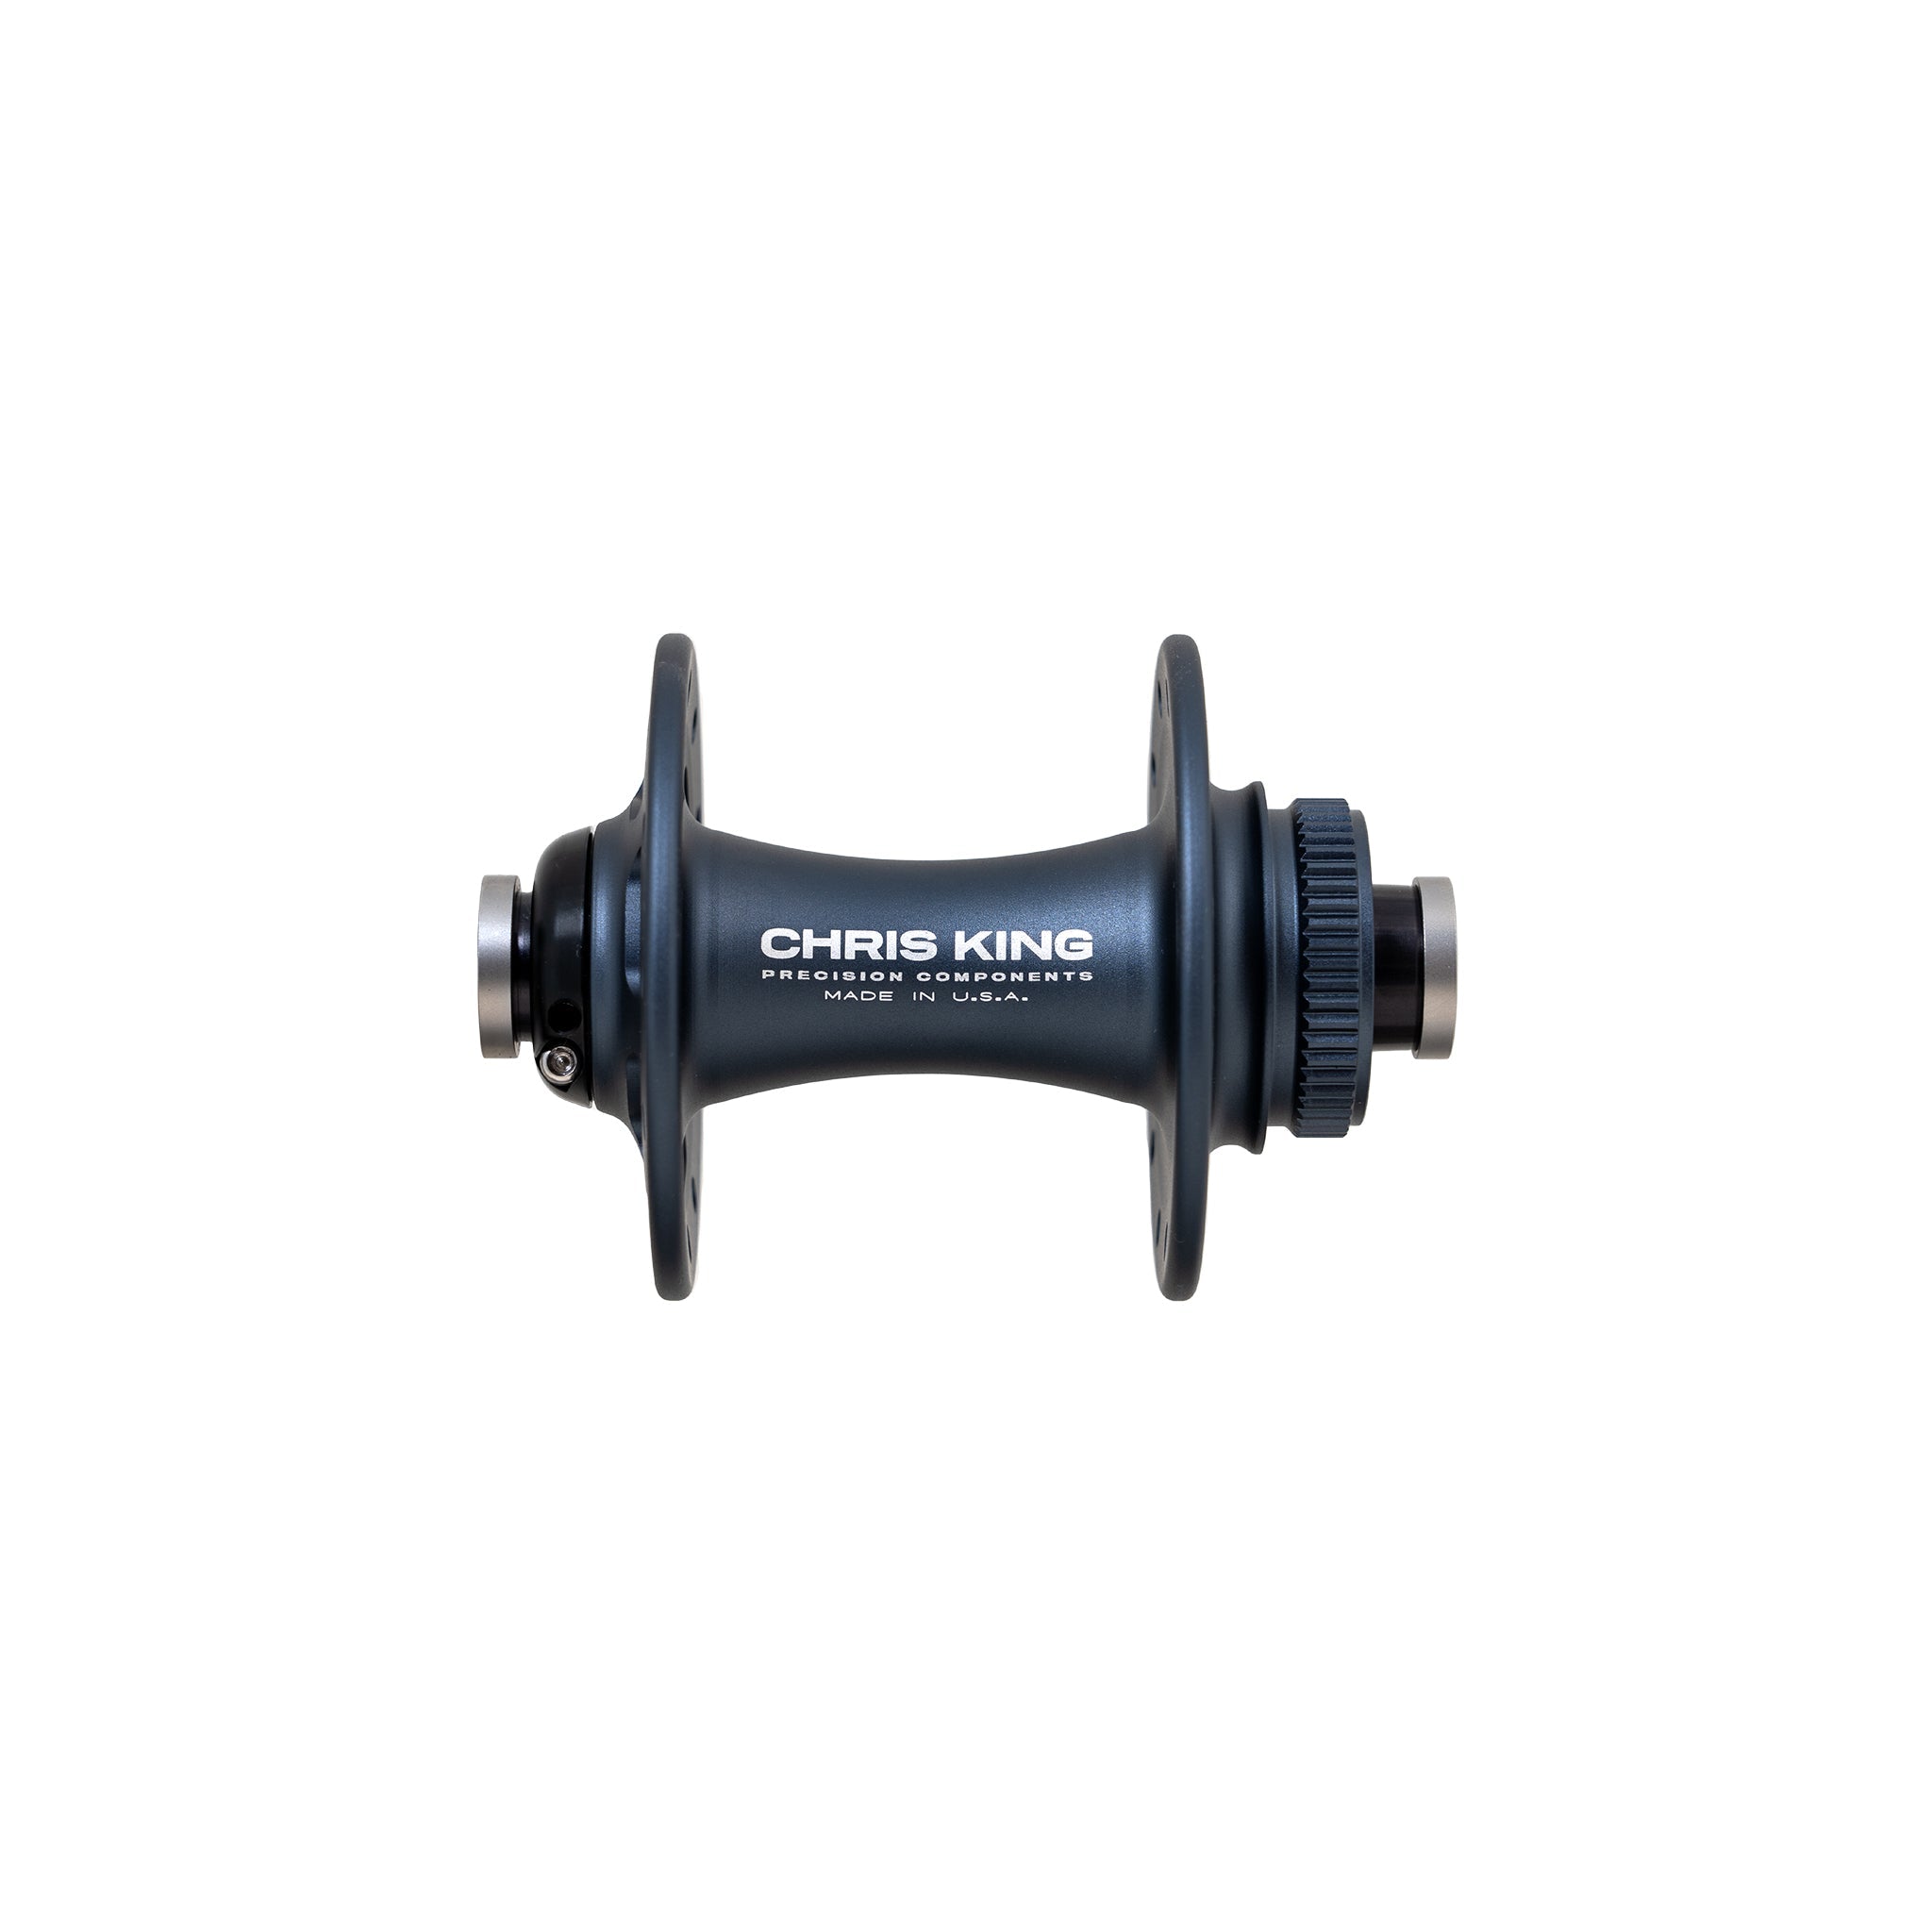 Chris king r4d front hub in midnight blue